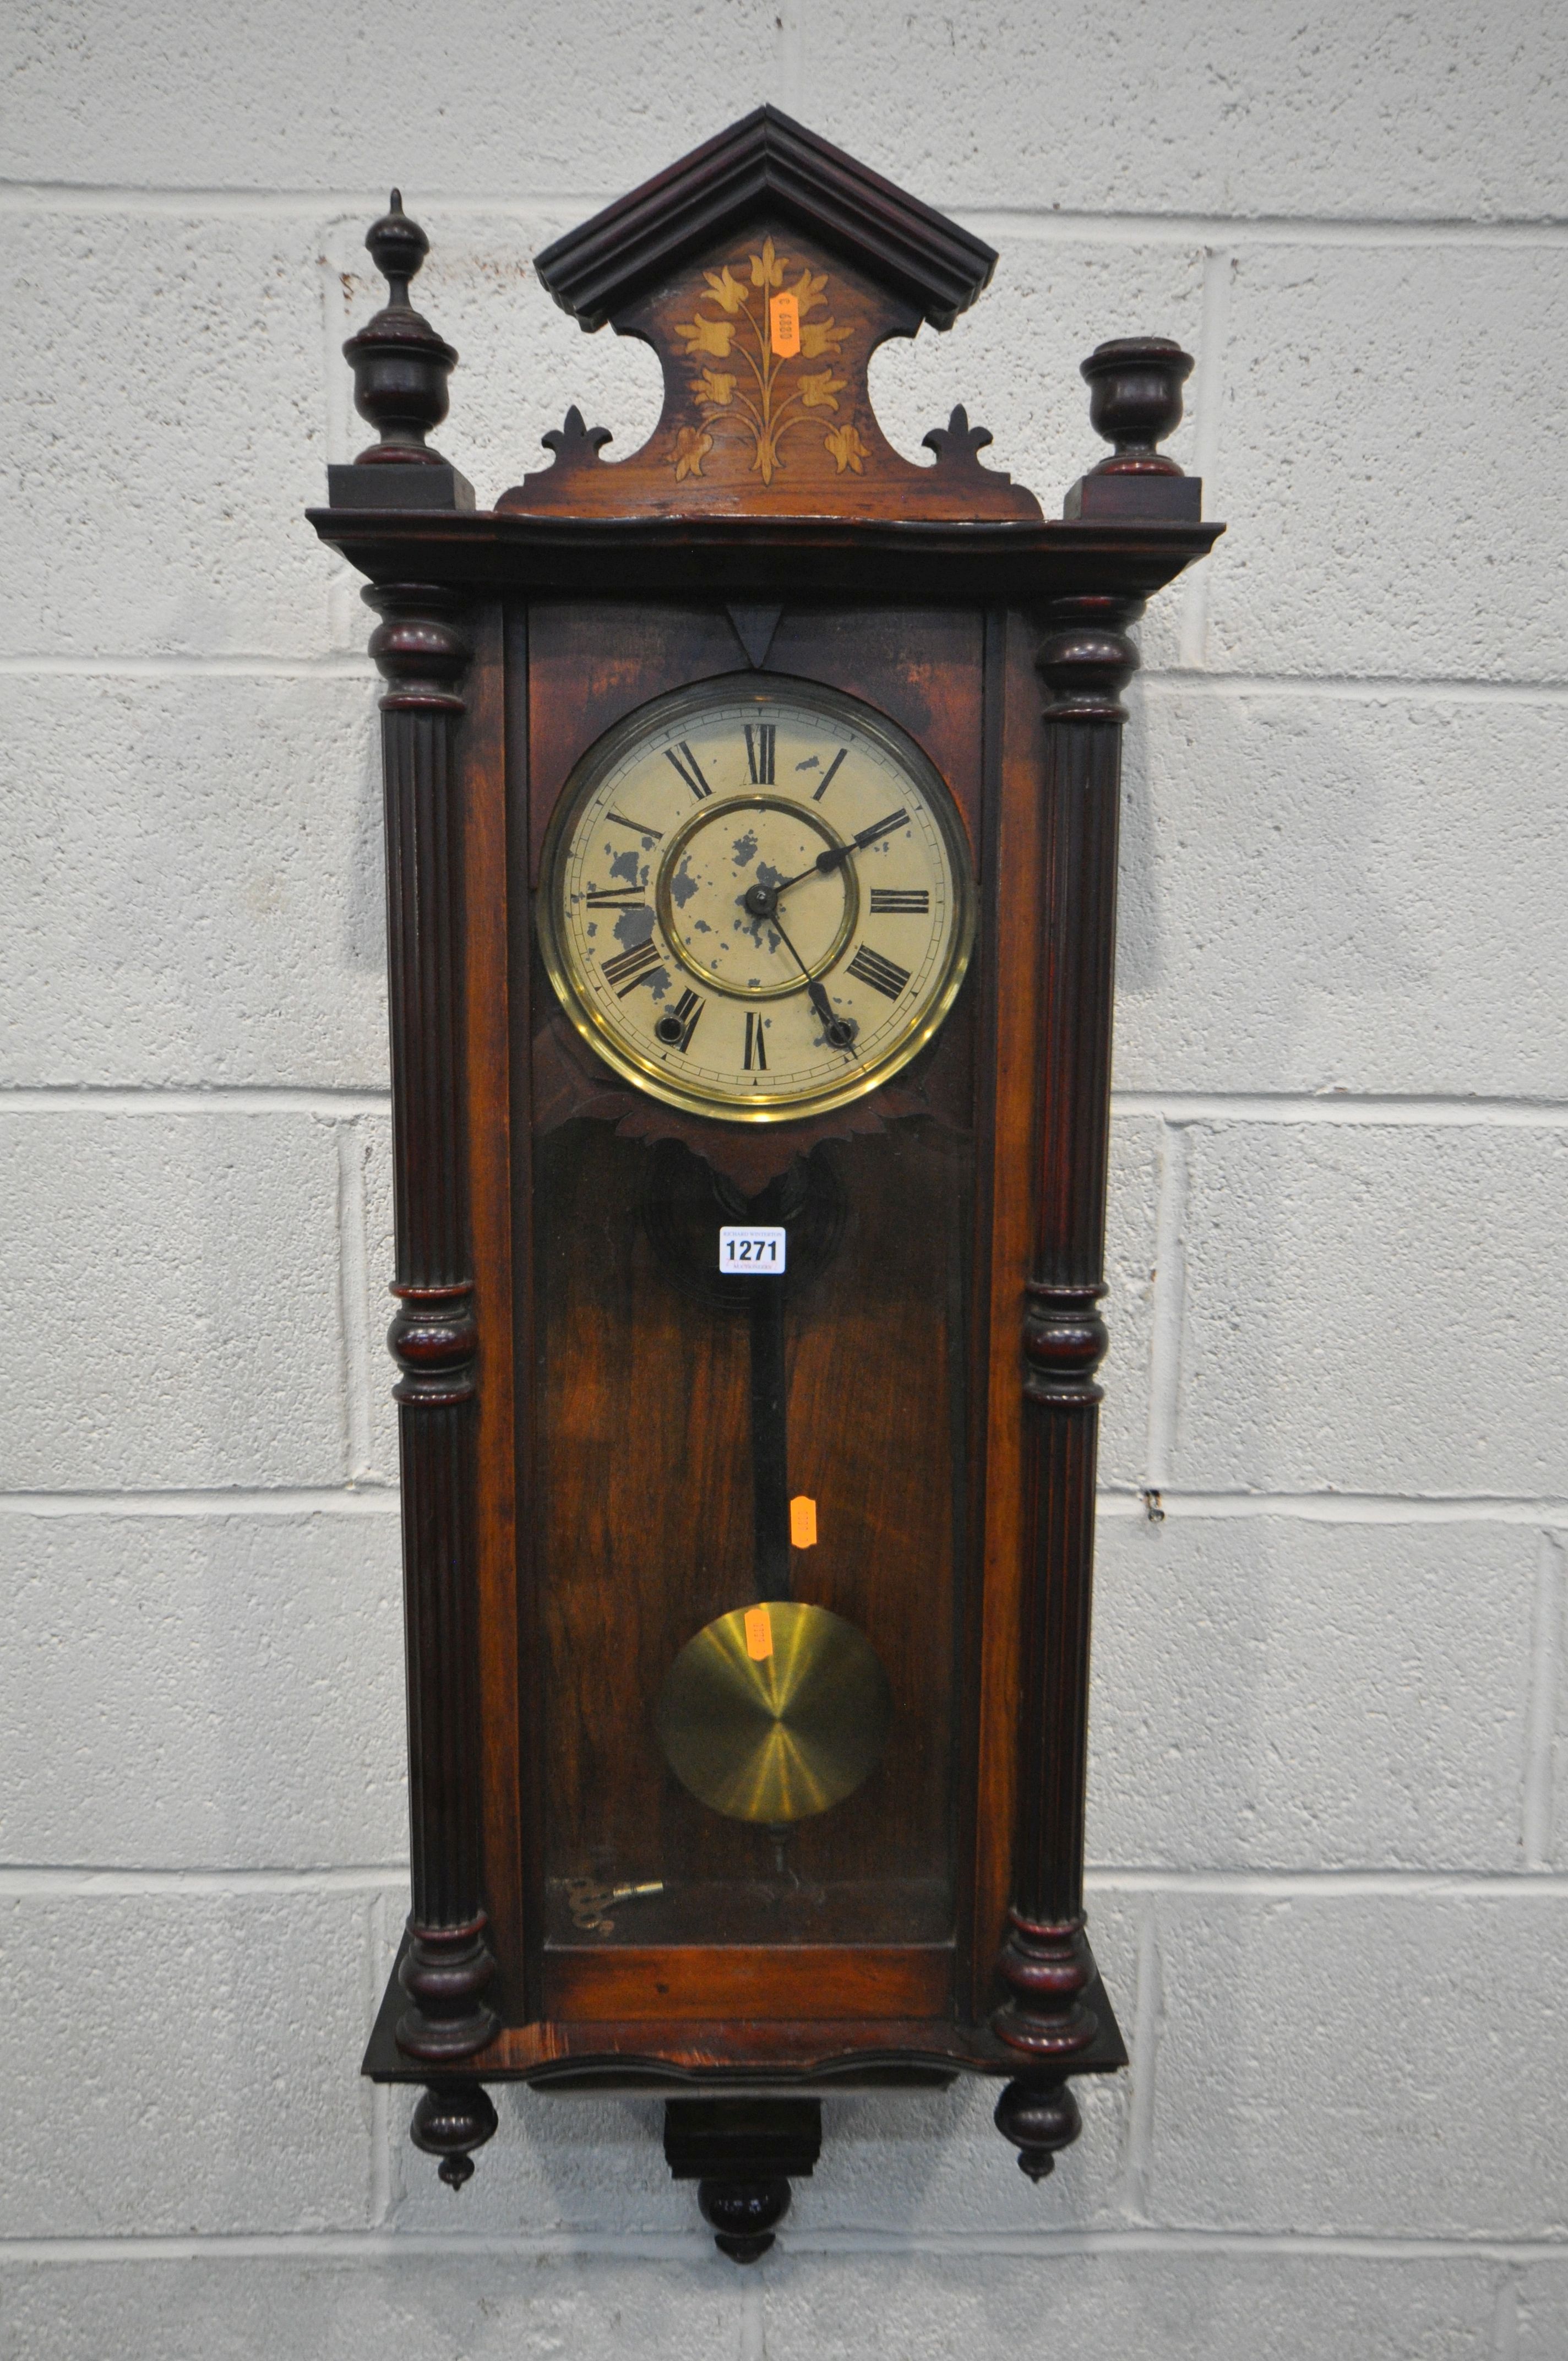 A 19TH CENTURY WALNUT AND INLAID VIENNA WALL CLOCK, height 112cm, with winding key and pendulum (